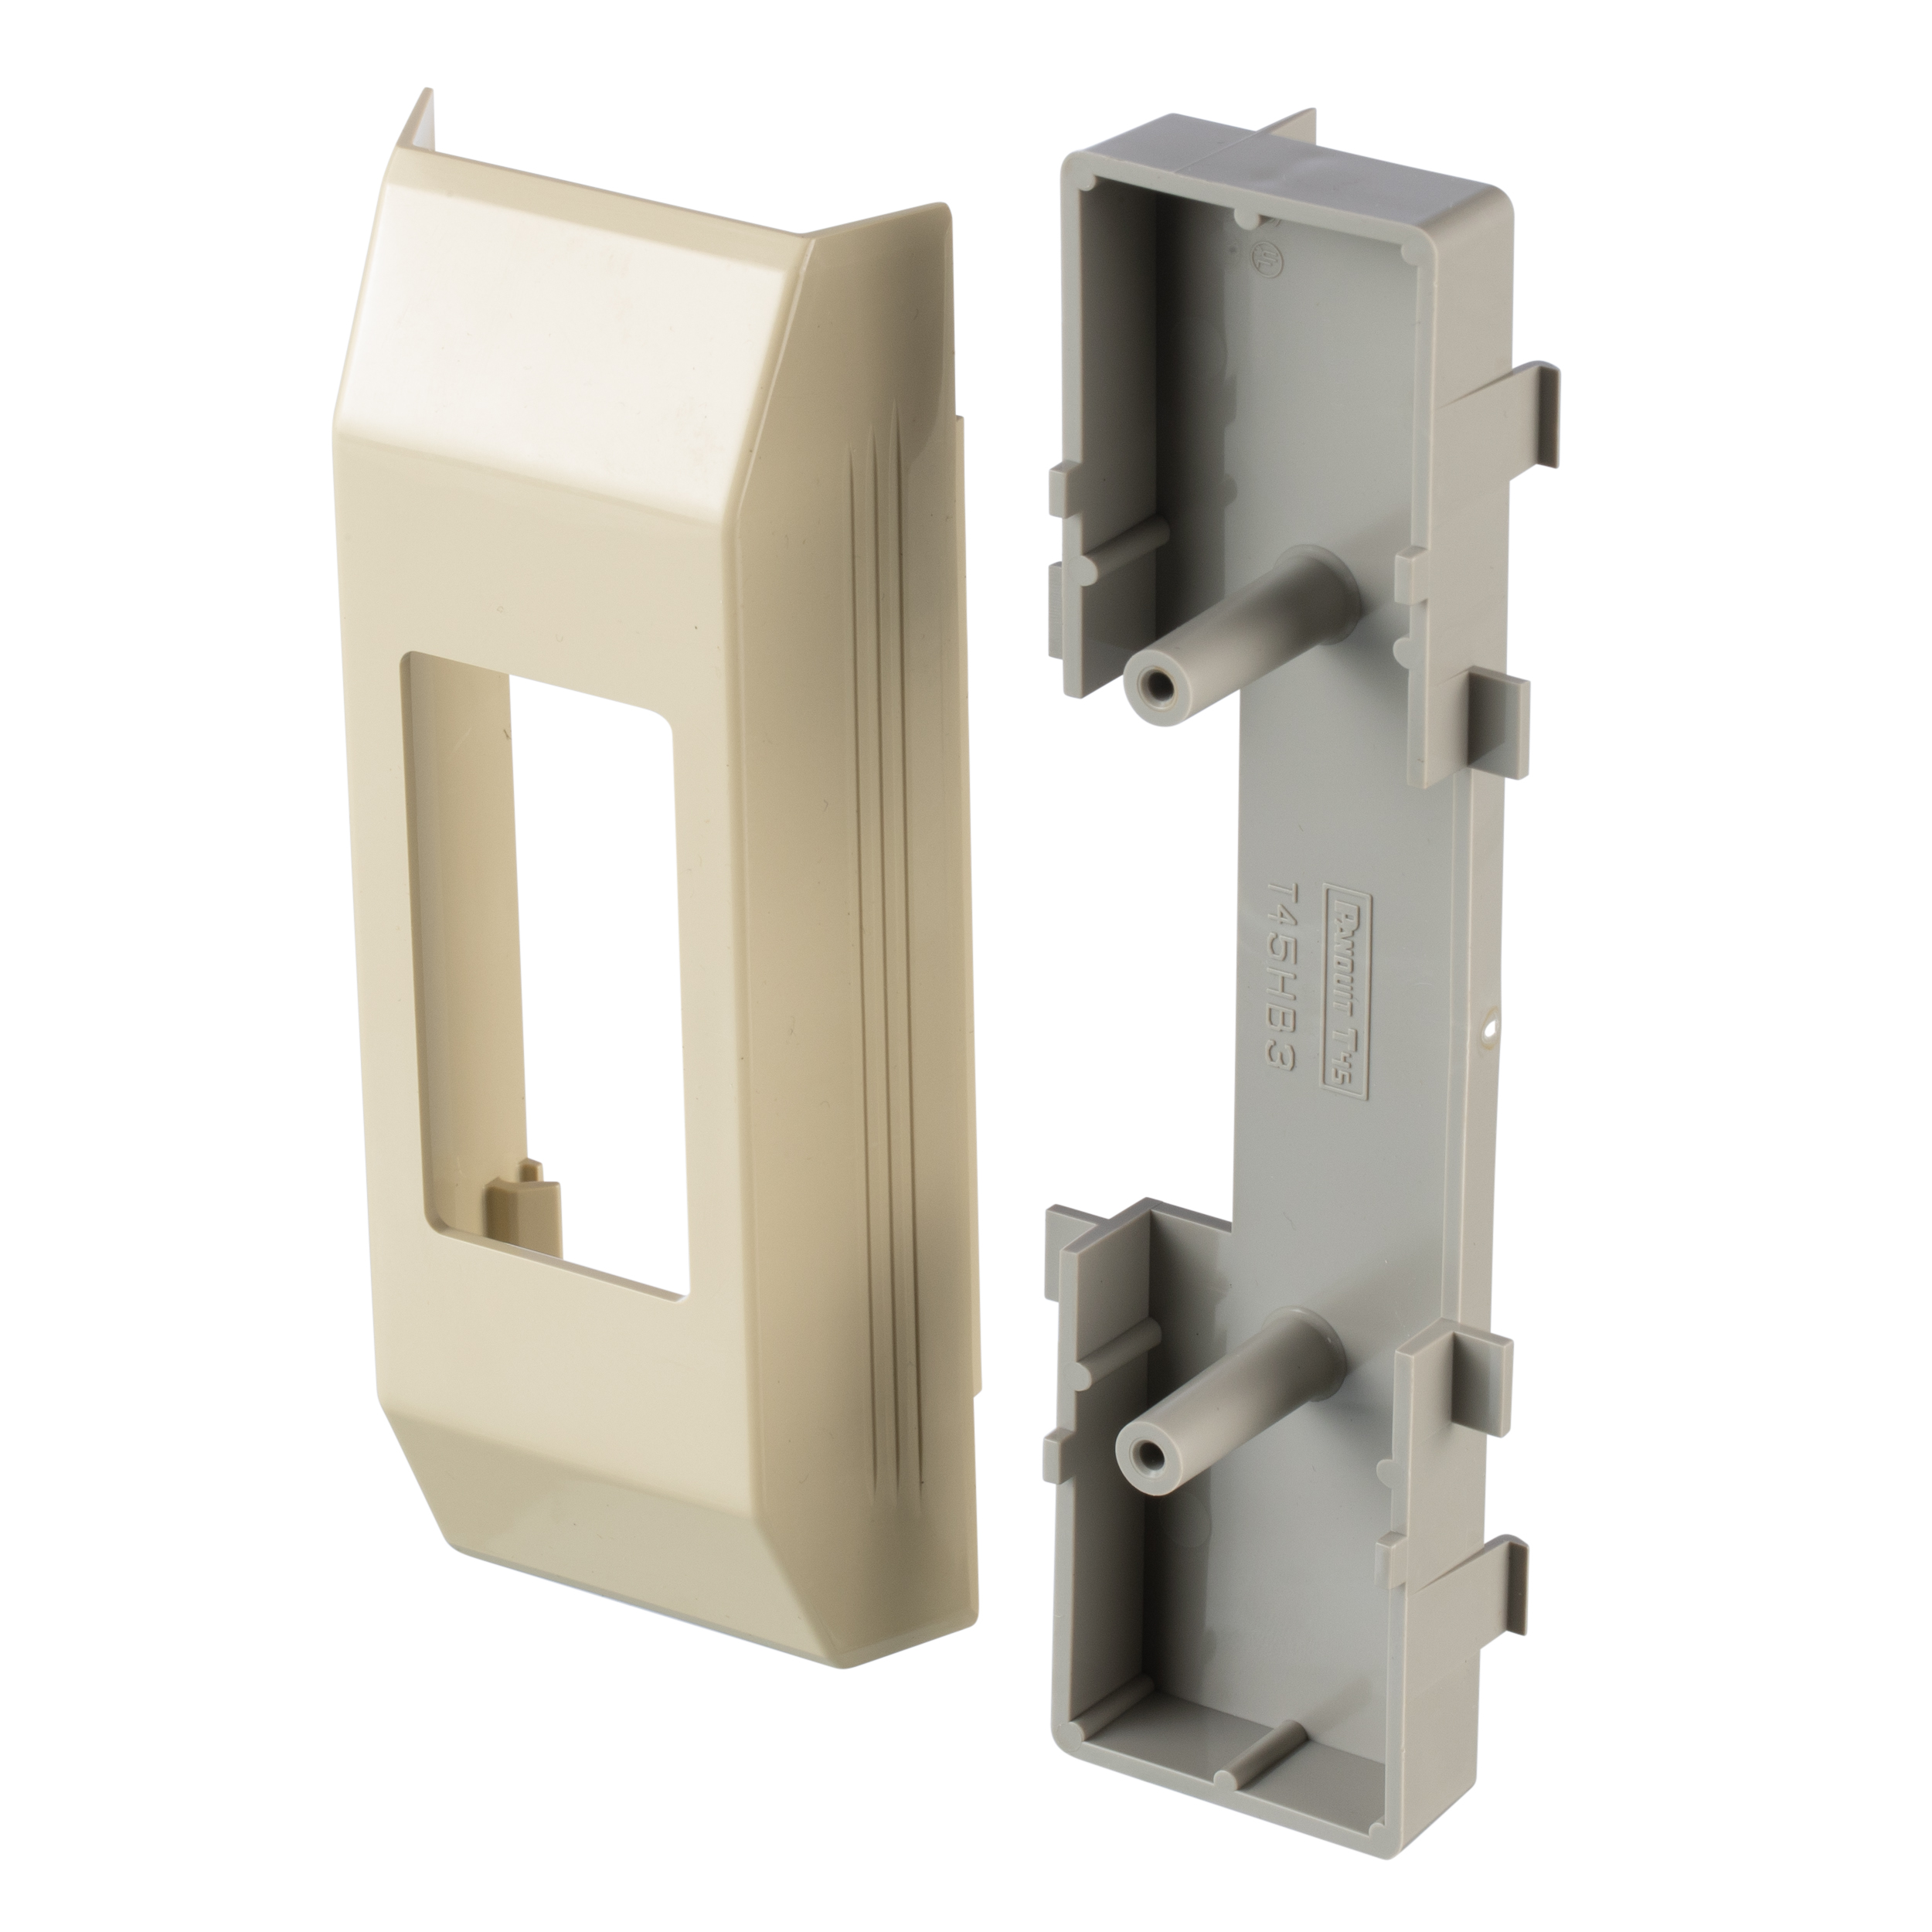 Surface Raceway, T-45 Electrical Bracket, Electric Ivory